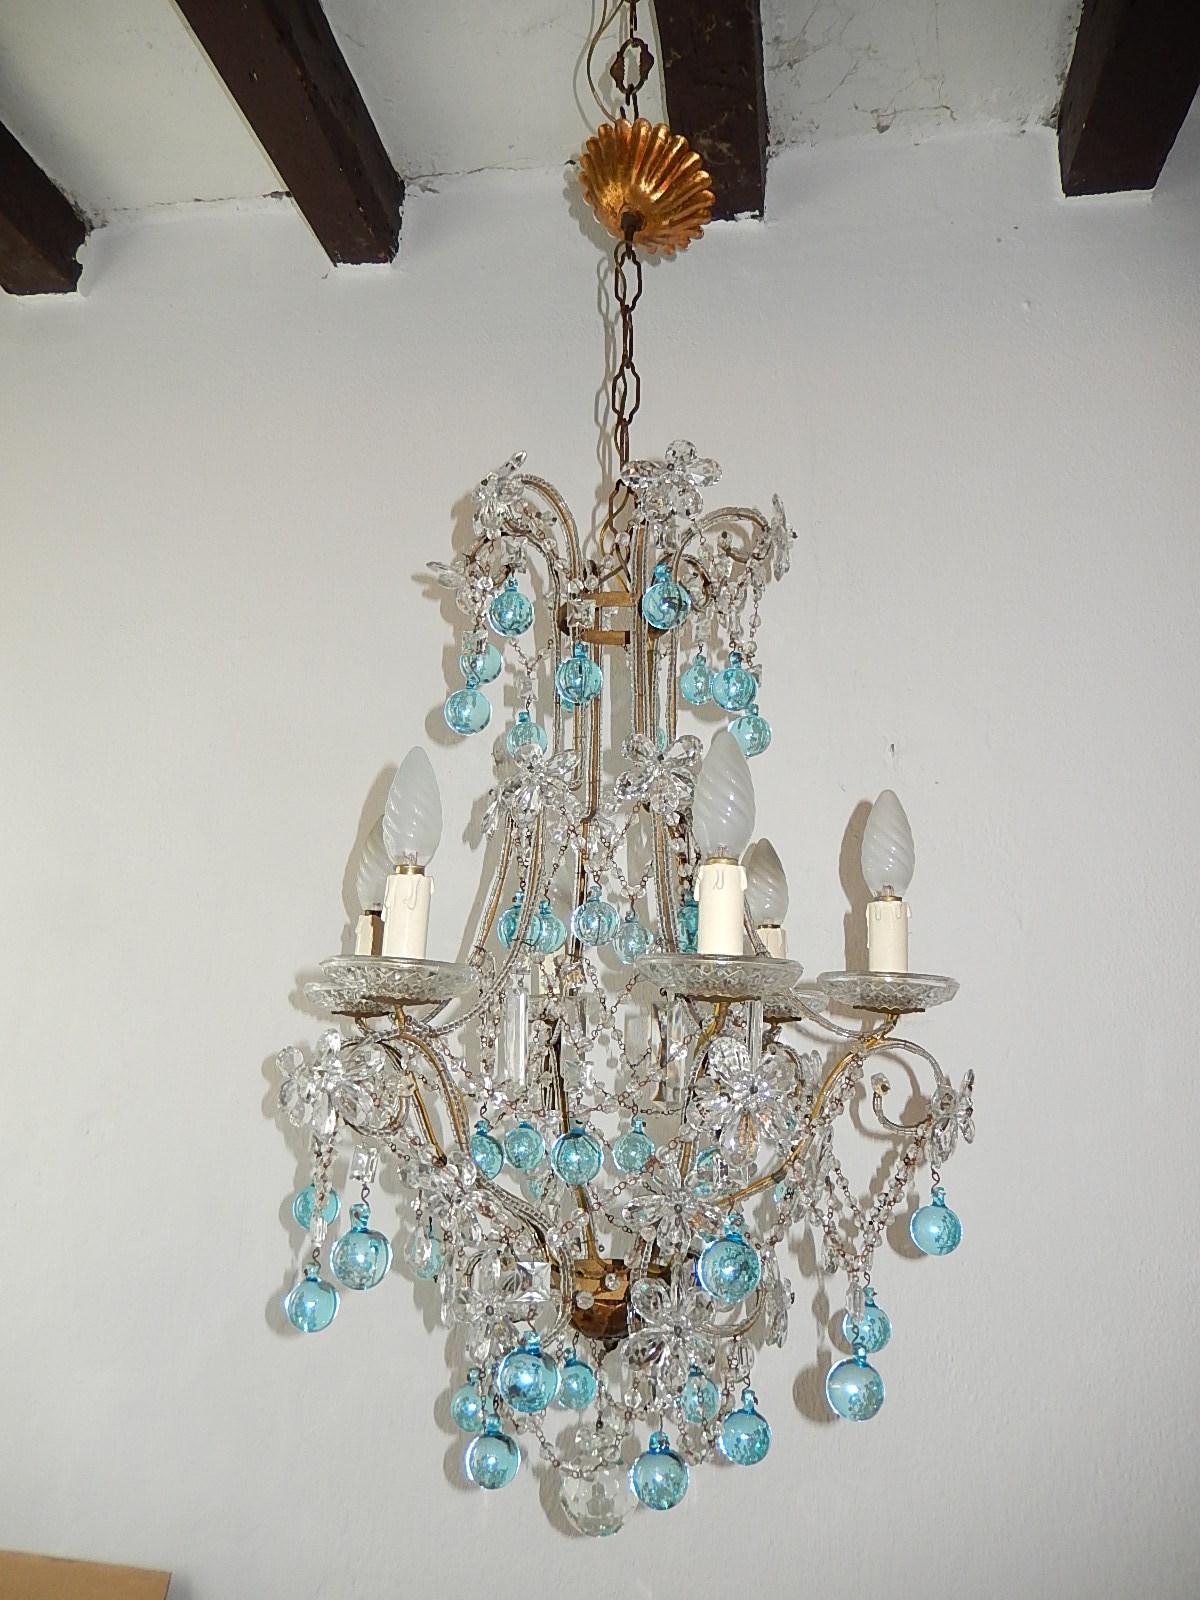 Housing six lights, sitting in rare cut crystal bobeches. Double beading throughout. Swags of crystal beads. The wires look rusty in photos, but this is the fault of the flash. Adorning flowers made of crystal prisms plus rare square crystal prisms